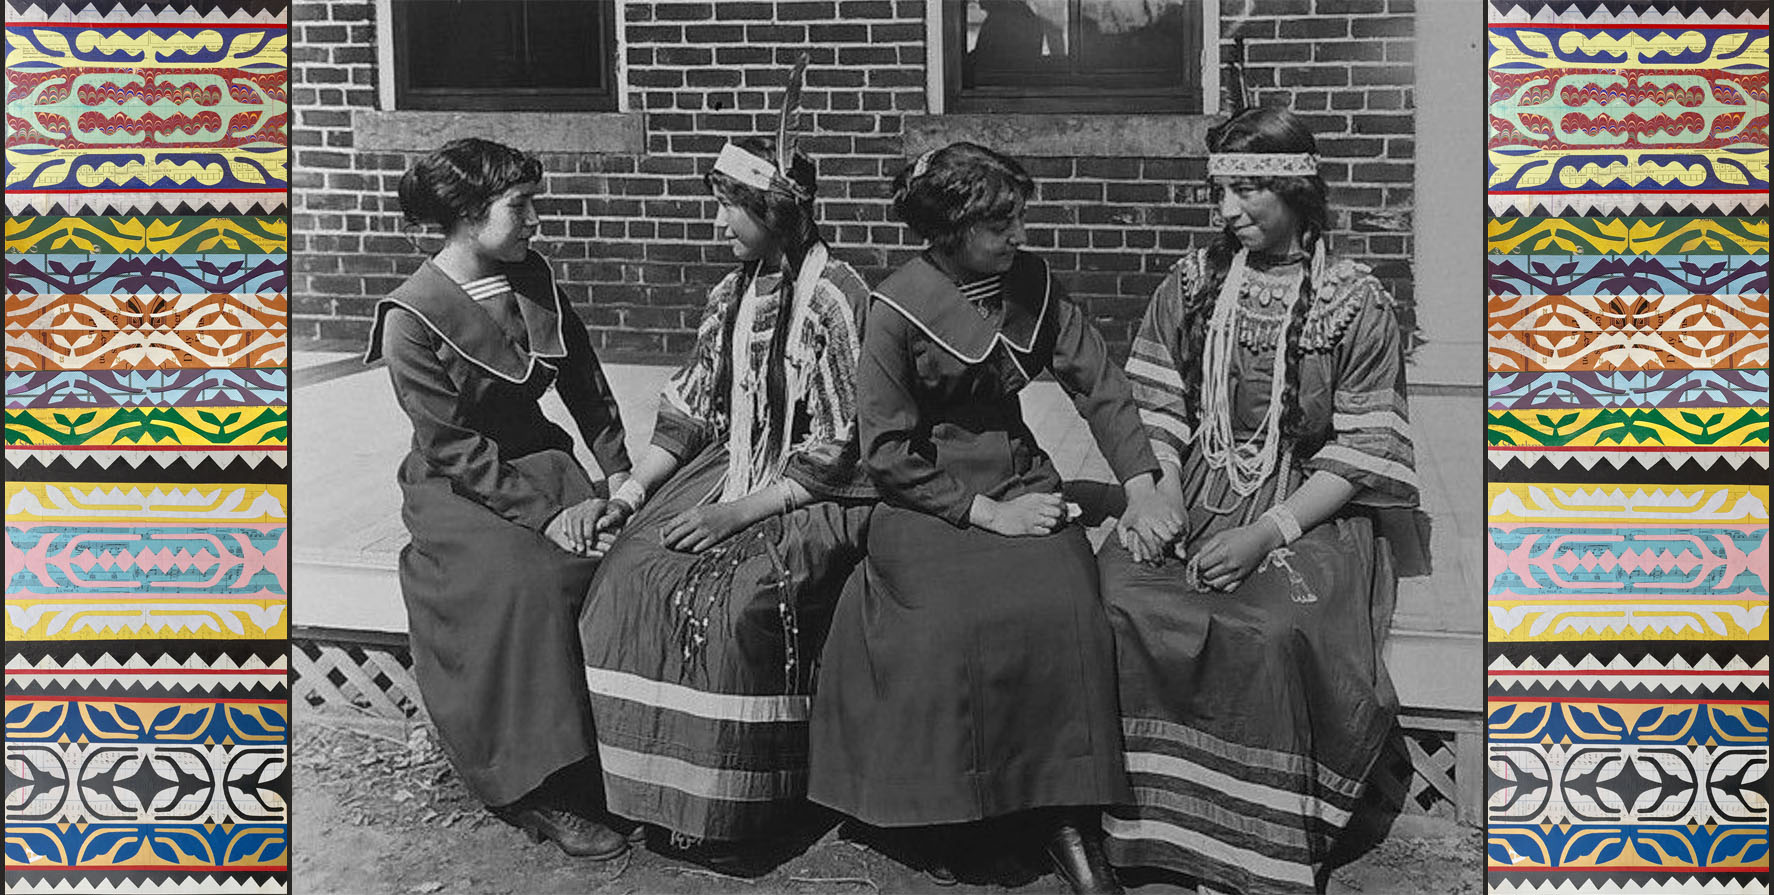 Representatives of the Sac & Fox, Piegan, Sioux and Chippewa tribes." 75-GS-37, RG 75-GS. Photographs of Genoa Industrial School at Genoa, NE, 1910. National Archives and Records Administration, College Park, MD.